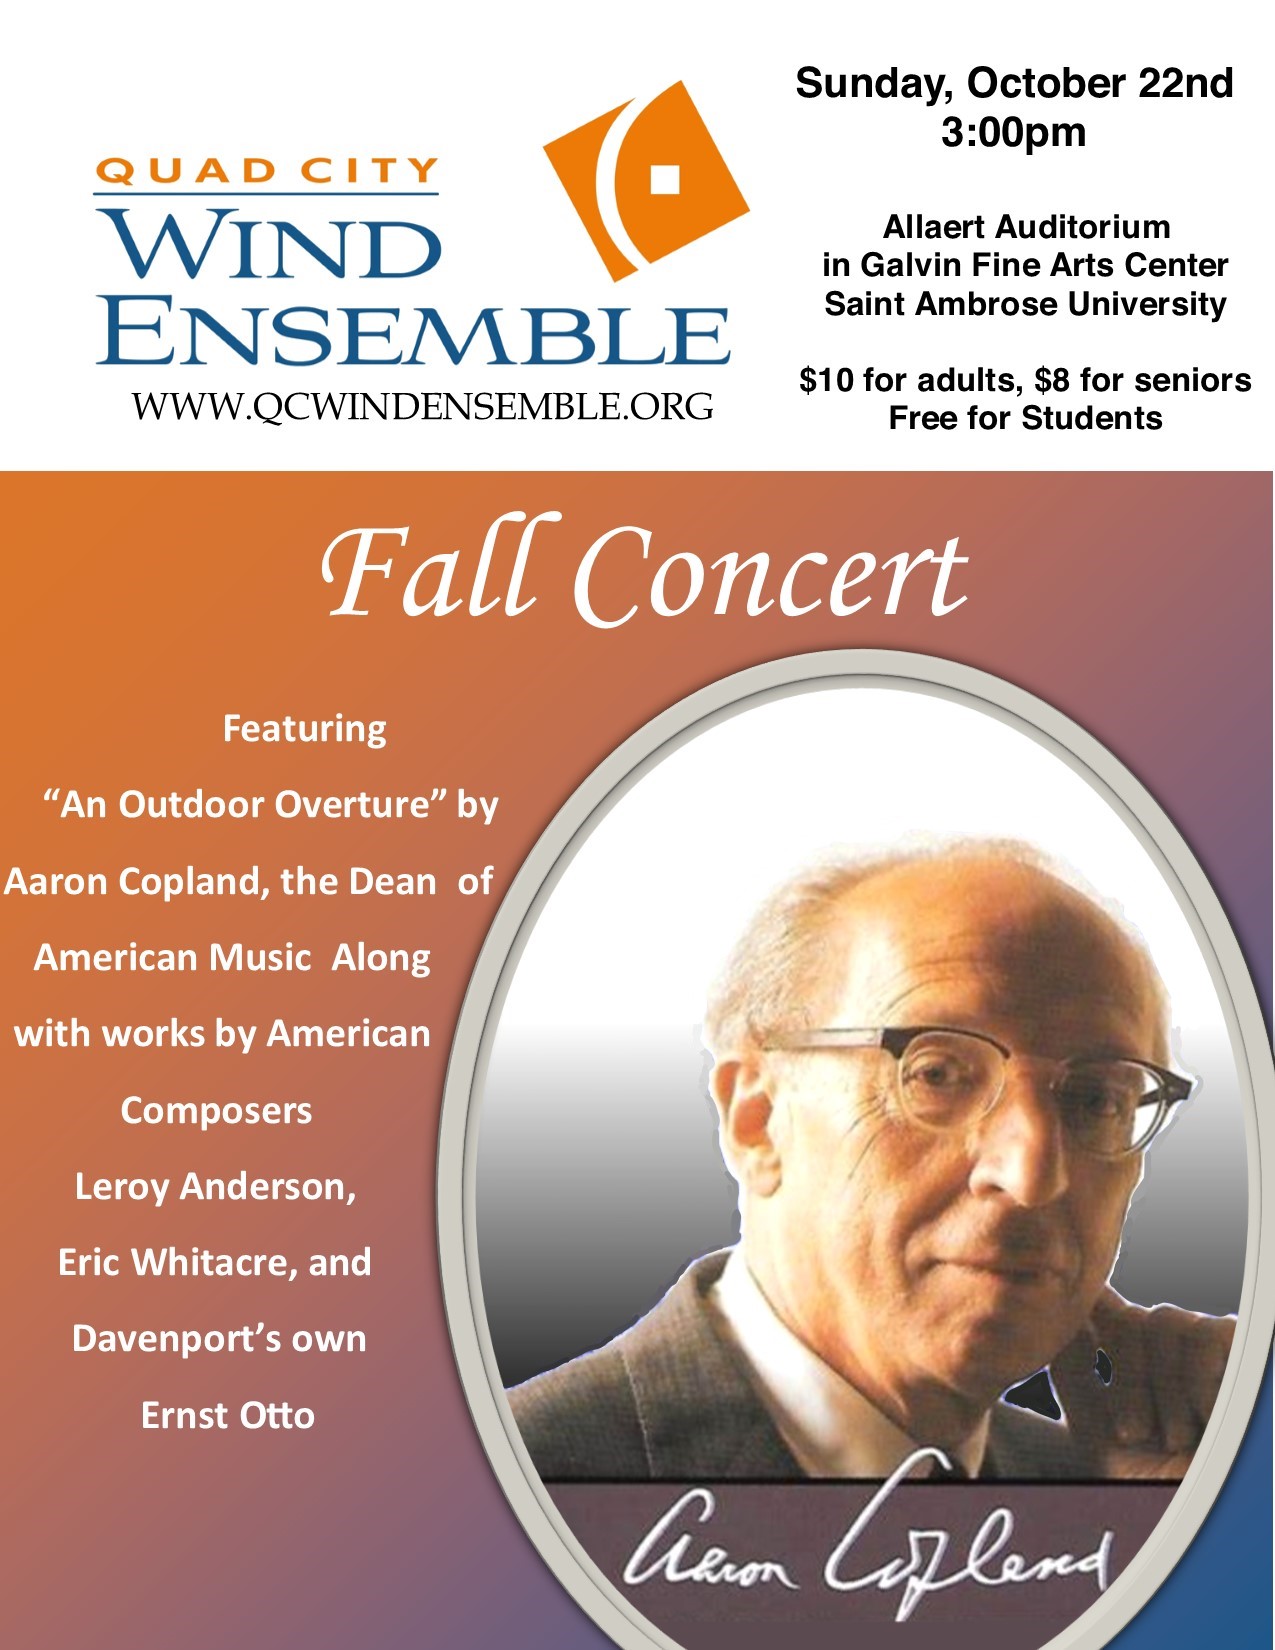 DOWNEY OVERTURE – Overture for Wind Band